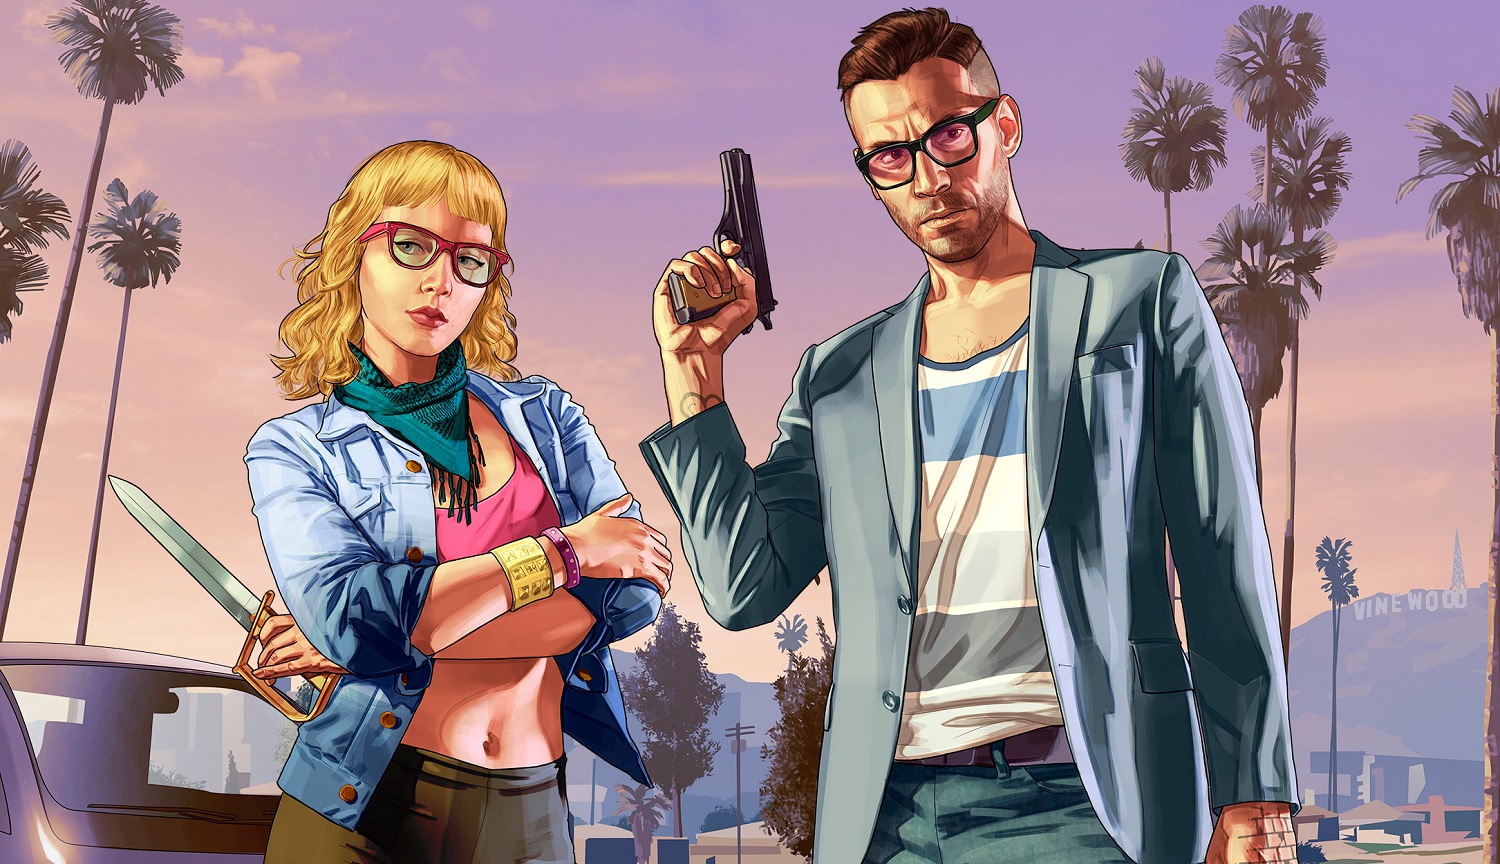 GTA VI plot leaks, could be the best Grand Theft Auto ever